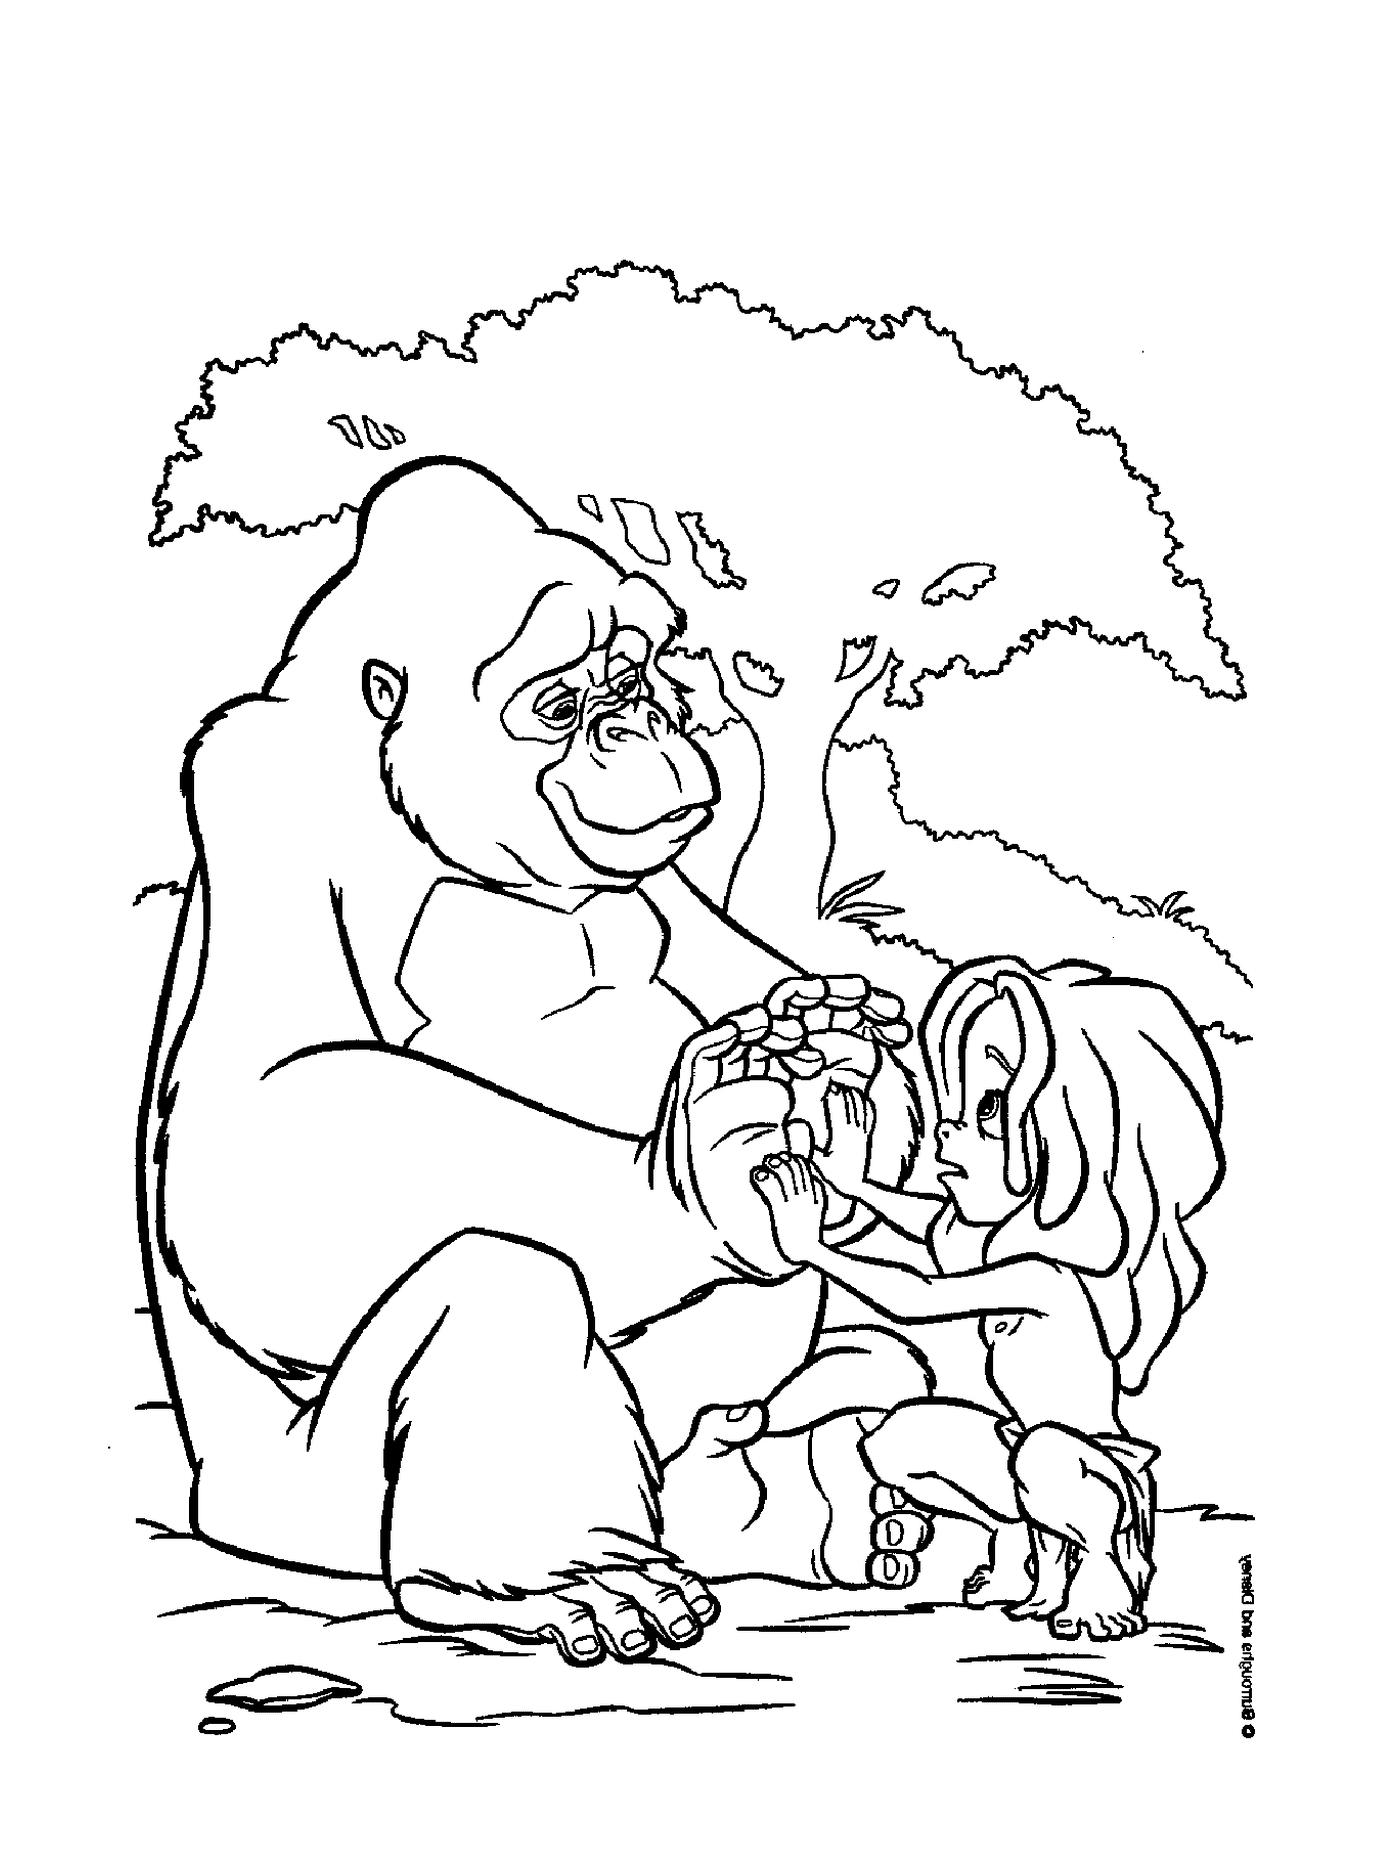  Adult and child playing with a gorilla 